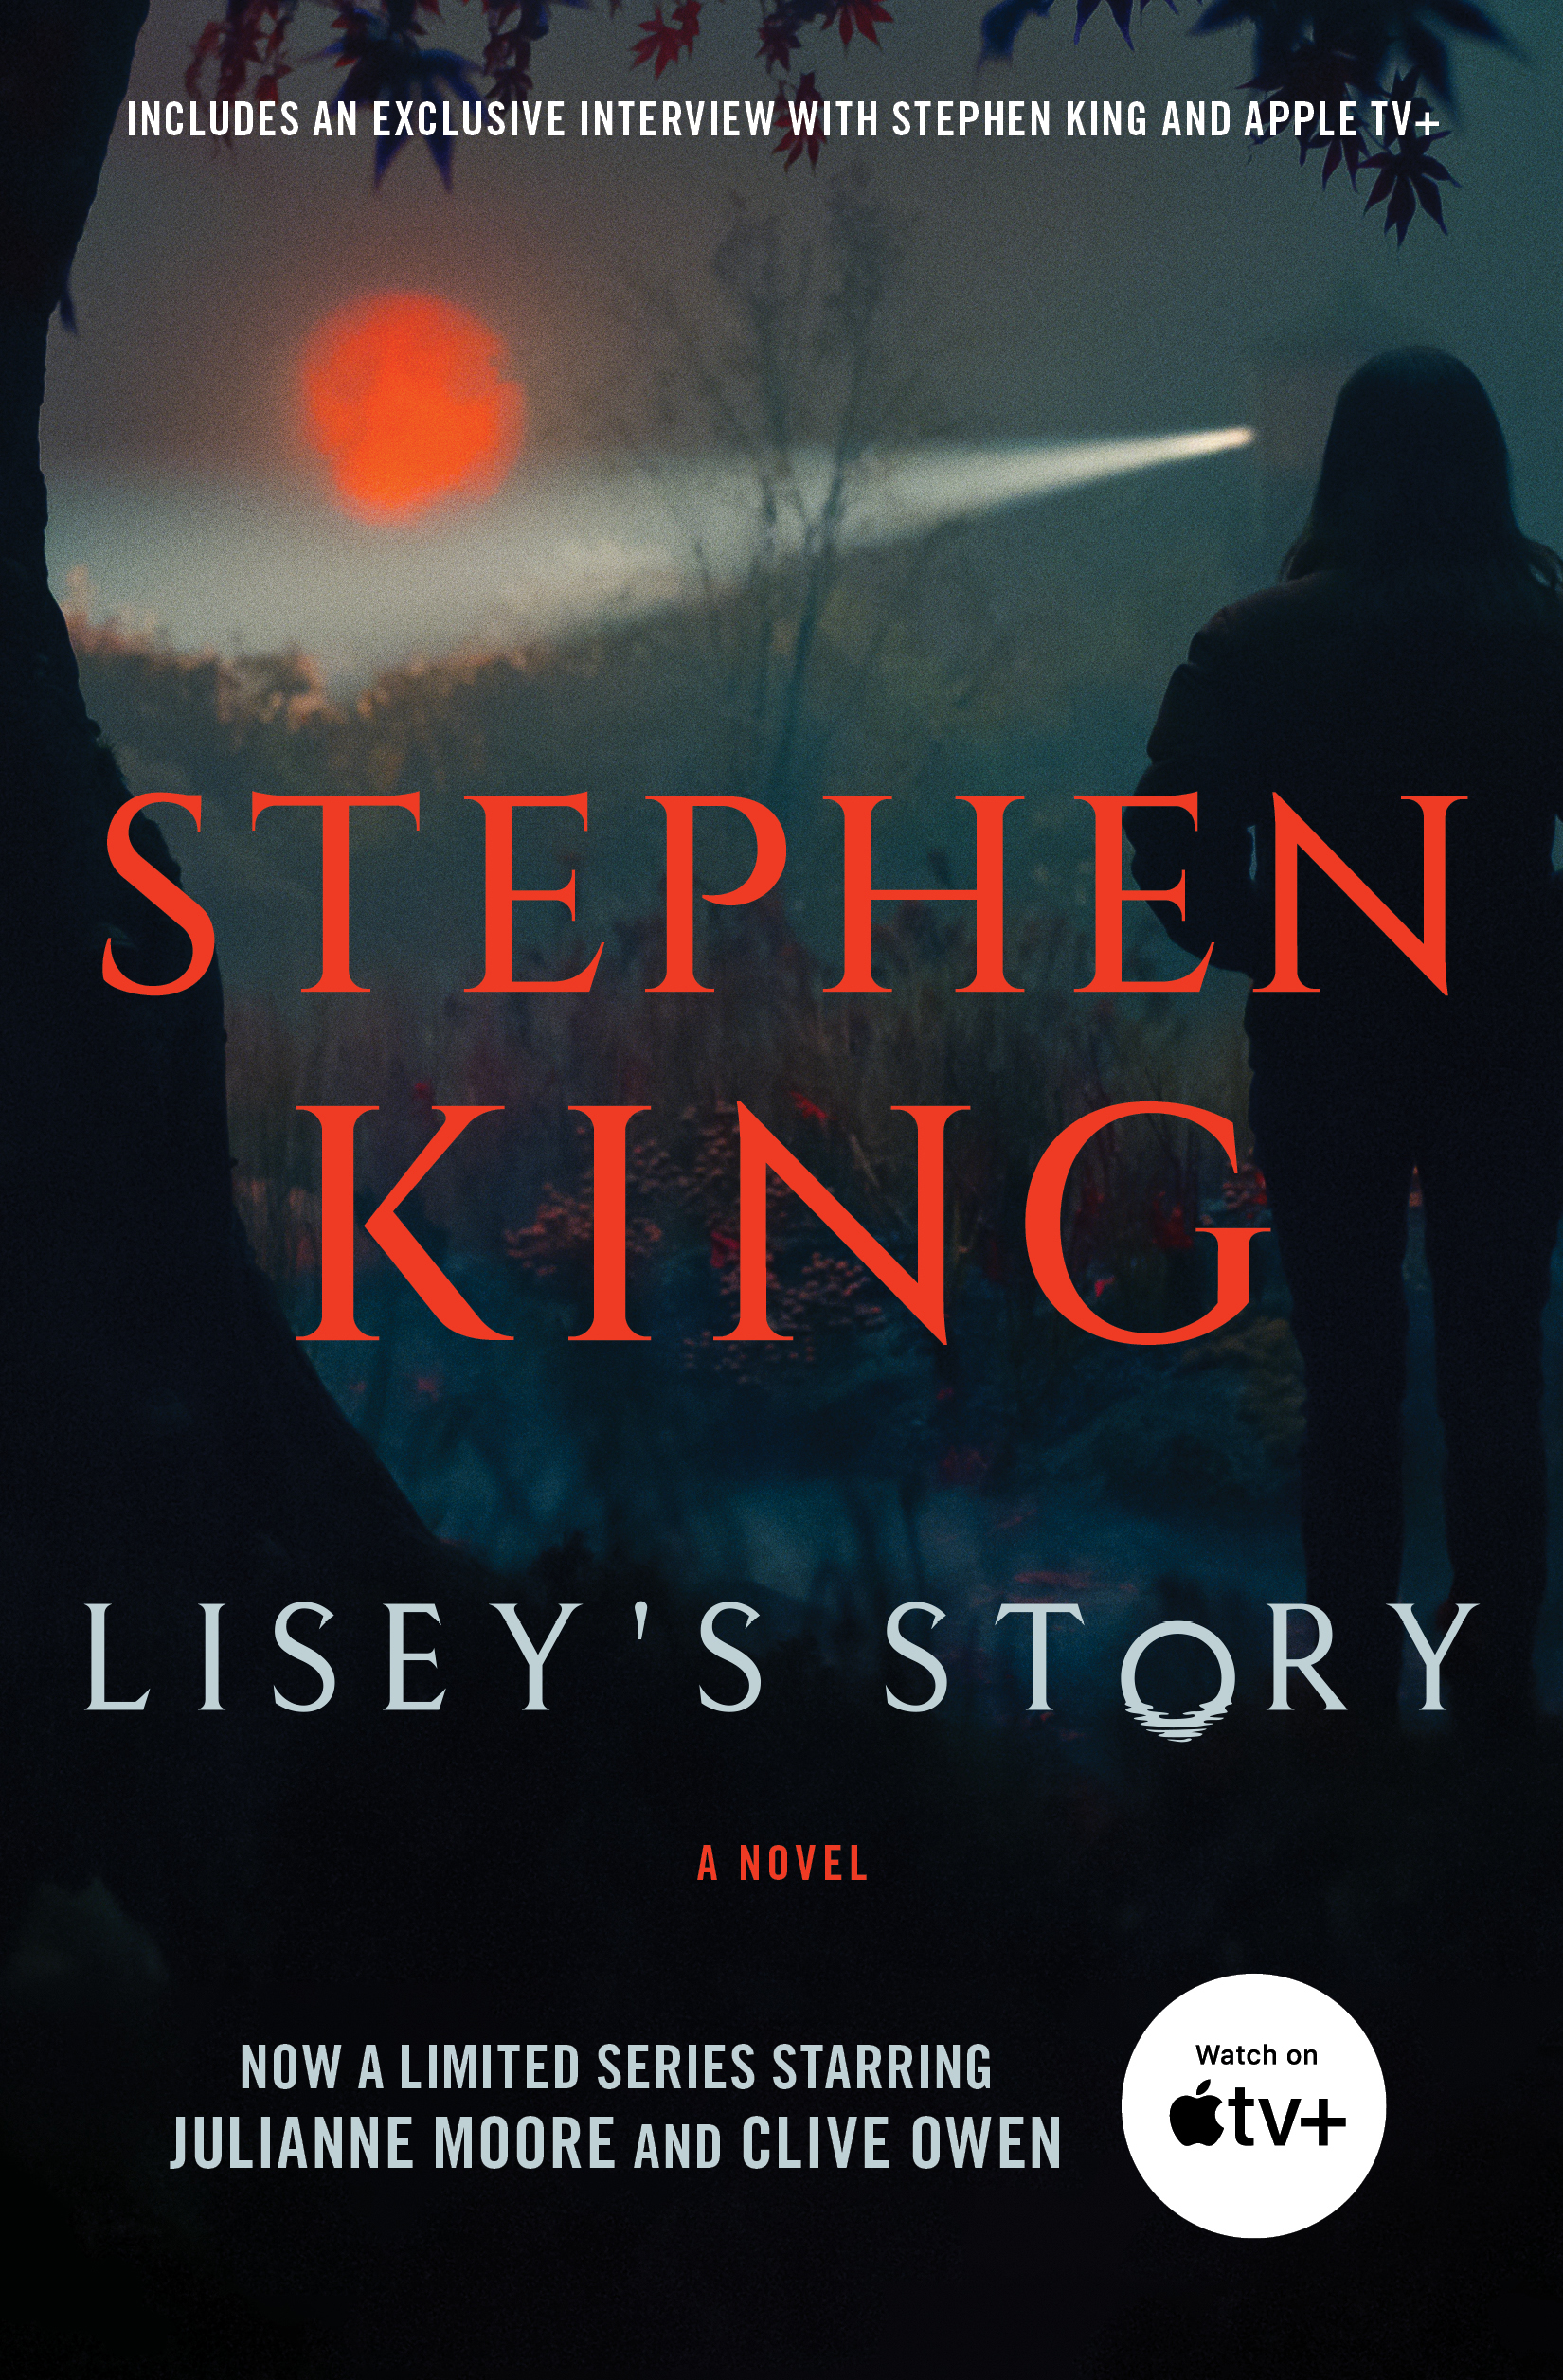 Lisey's Story Tie-In Edition Art